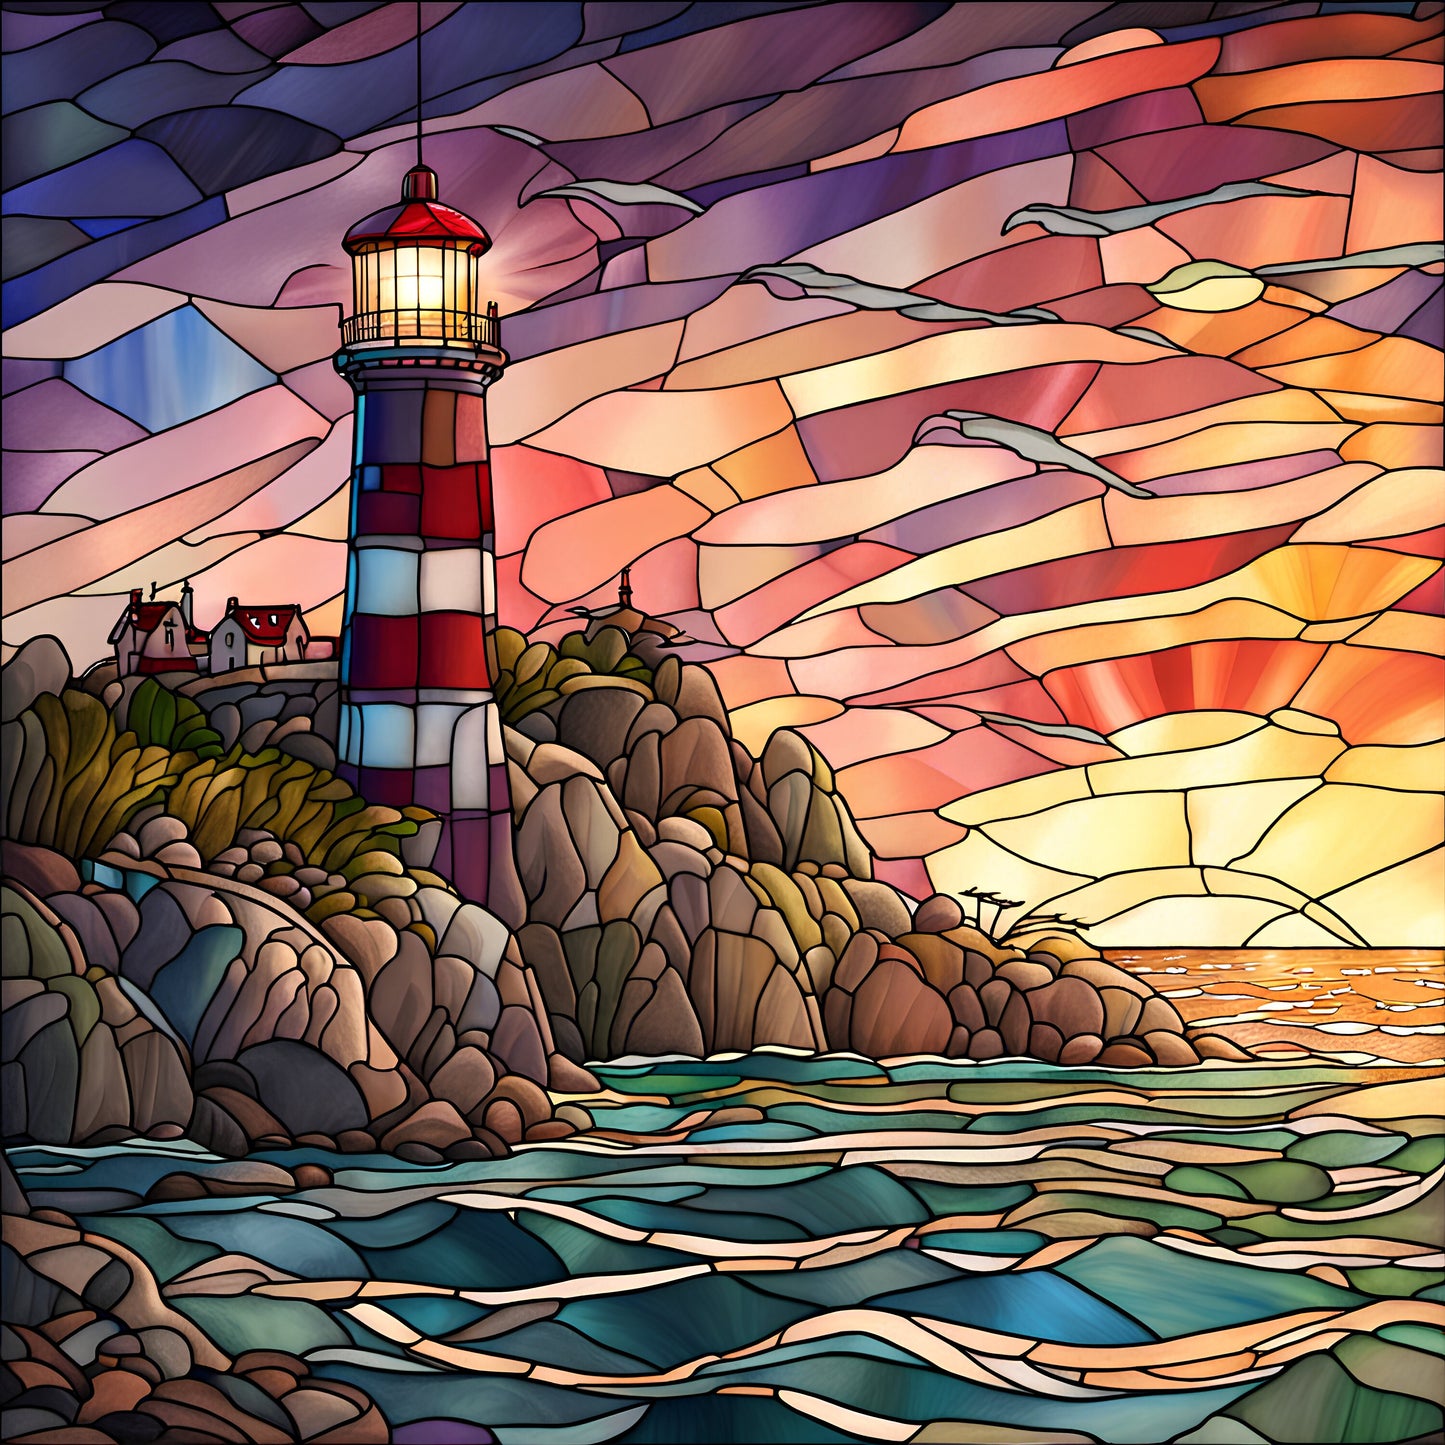 Lighthouse, Faux Stained Glass Inspired, Sunset Landscape, Sublimation Sign, Metal Sign, Wreath Attachment, Wreath Supplies (Square)